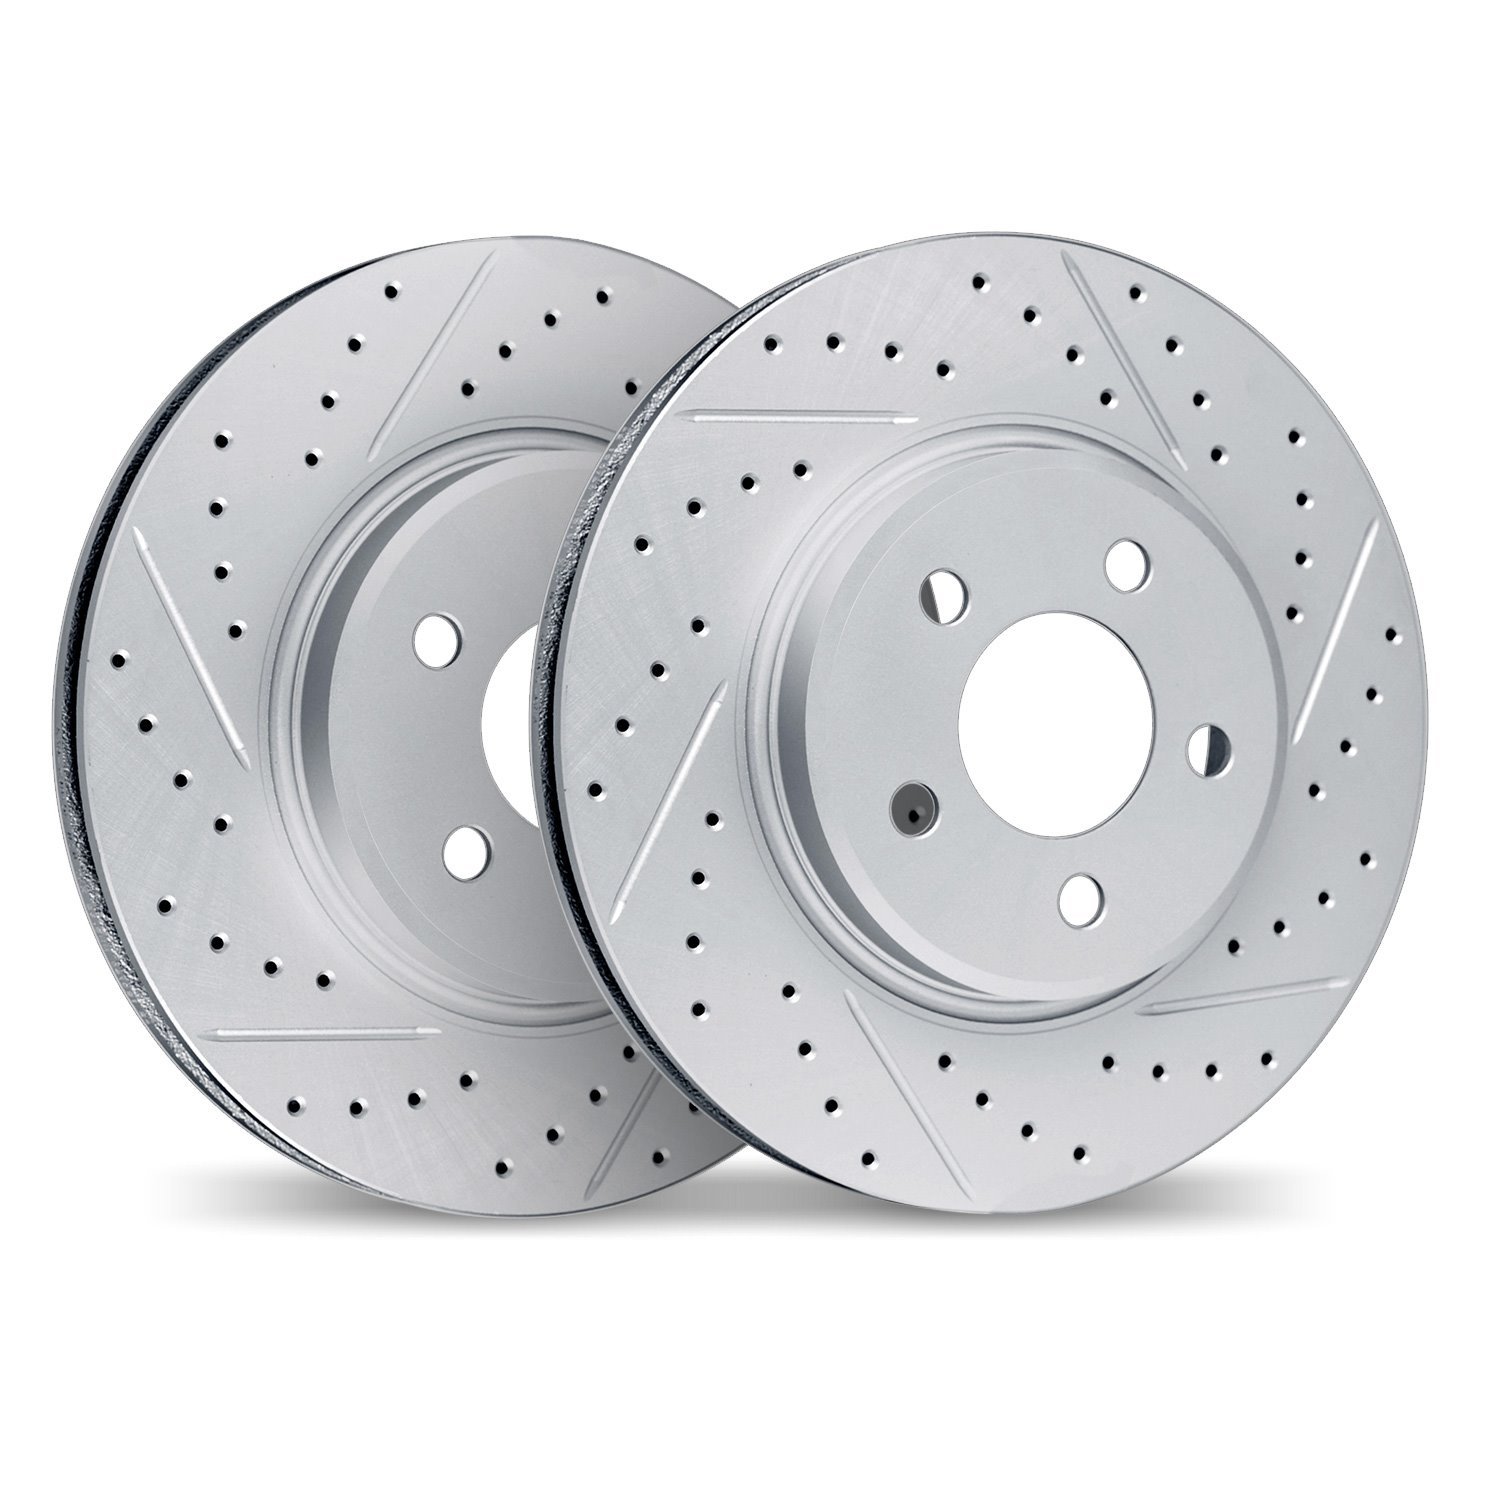 2002-59026 Geoperformance Drilled/Slotted Brake Rotors, Fits Select Acura/Honda, Position: Front